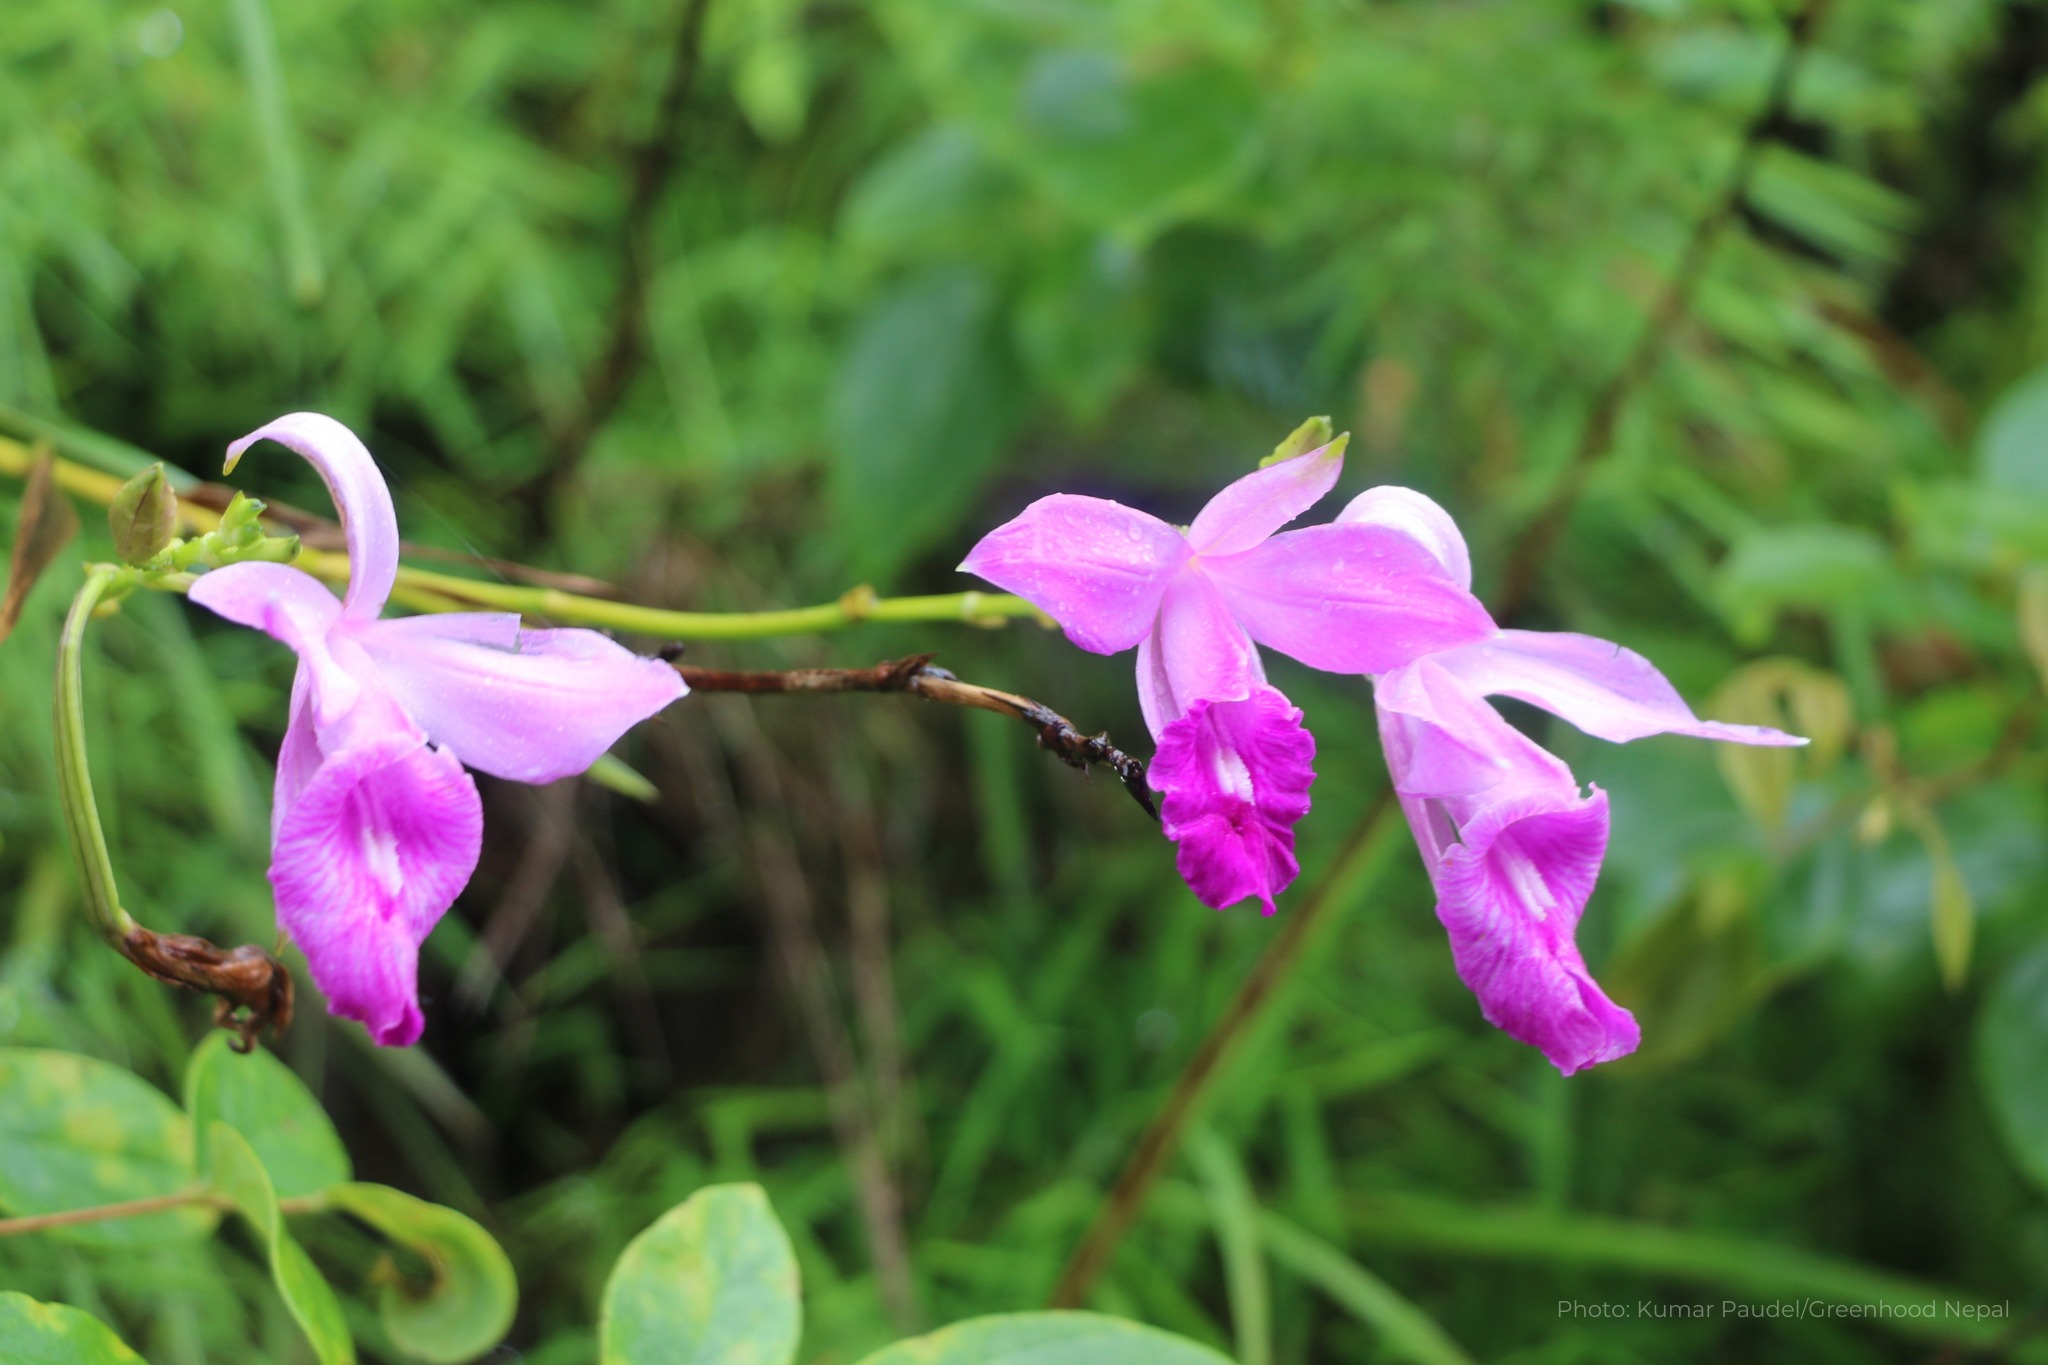 Illegal orchid trade threatens Nepal’s ‘tigers of the plant world